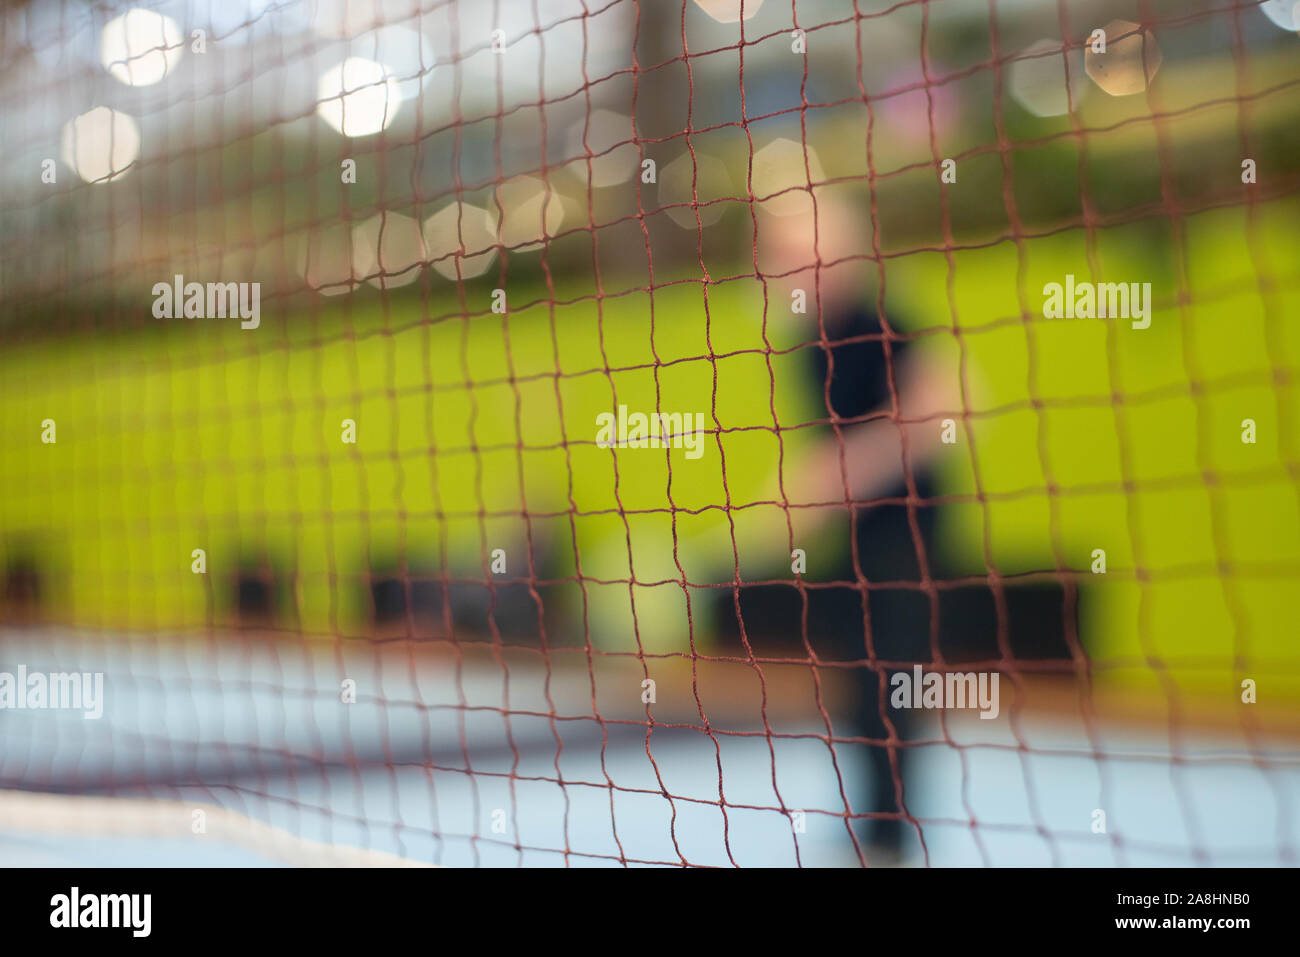 Badminton Net in focus with player Stock Photo